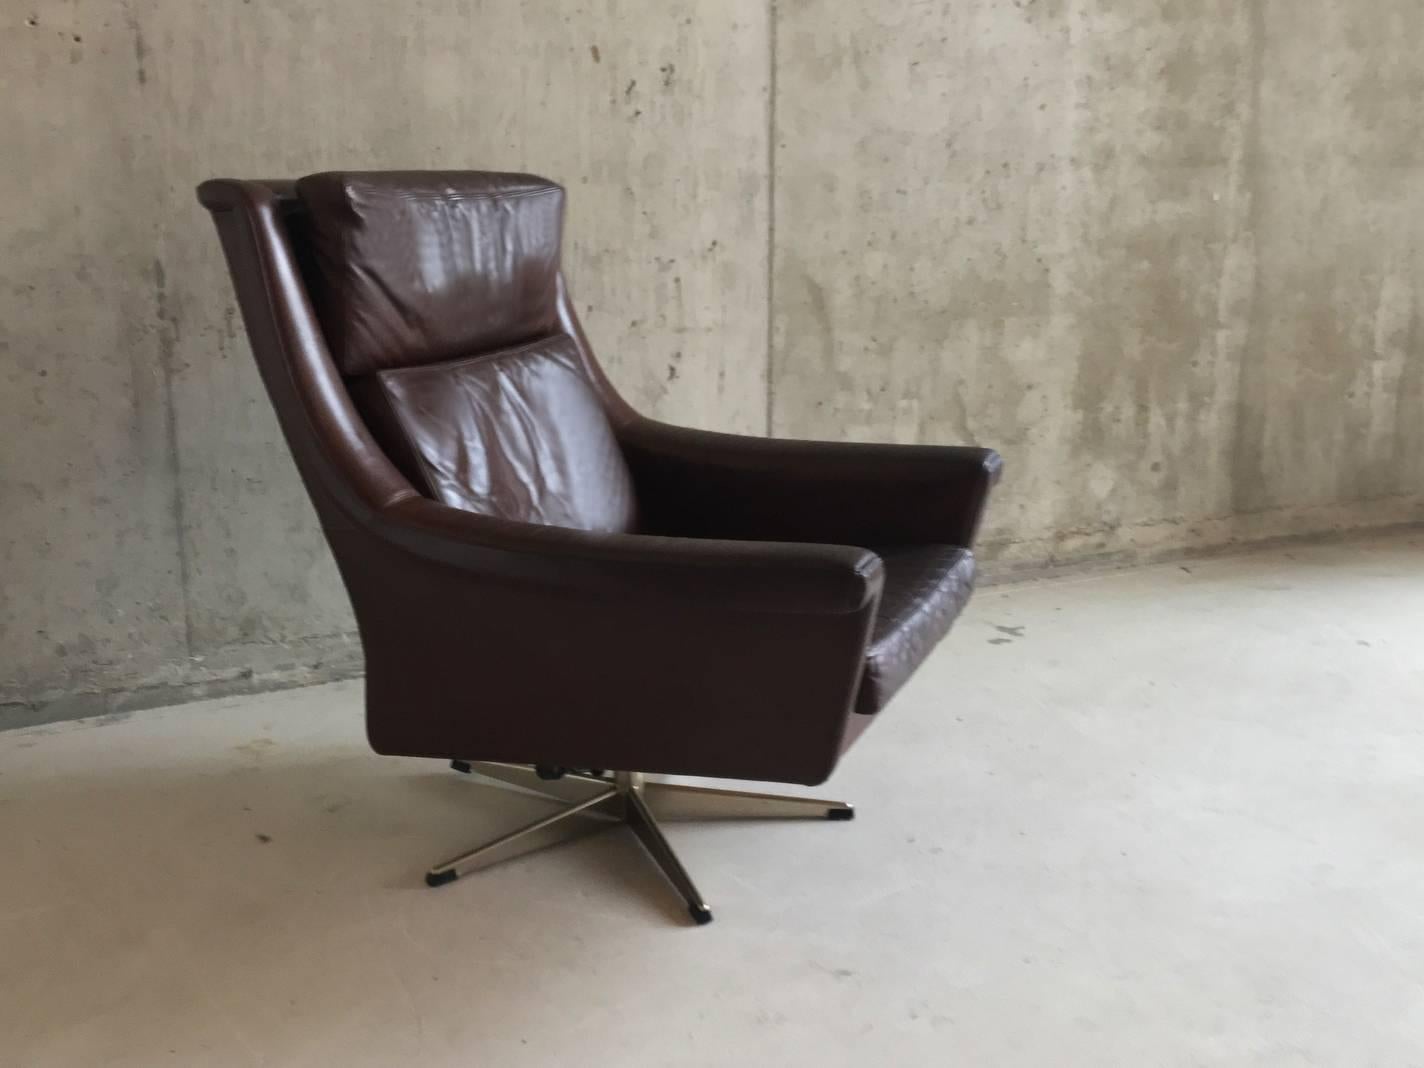 Superb shape. A lovely comfortable reclining chair made in Denmark in the late 1960s-early 1970s, upholstered in the original leather. With chromed steel base.